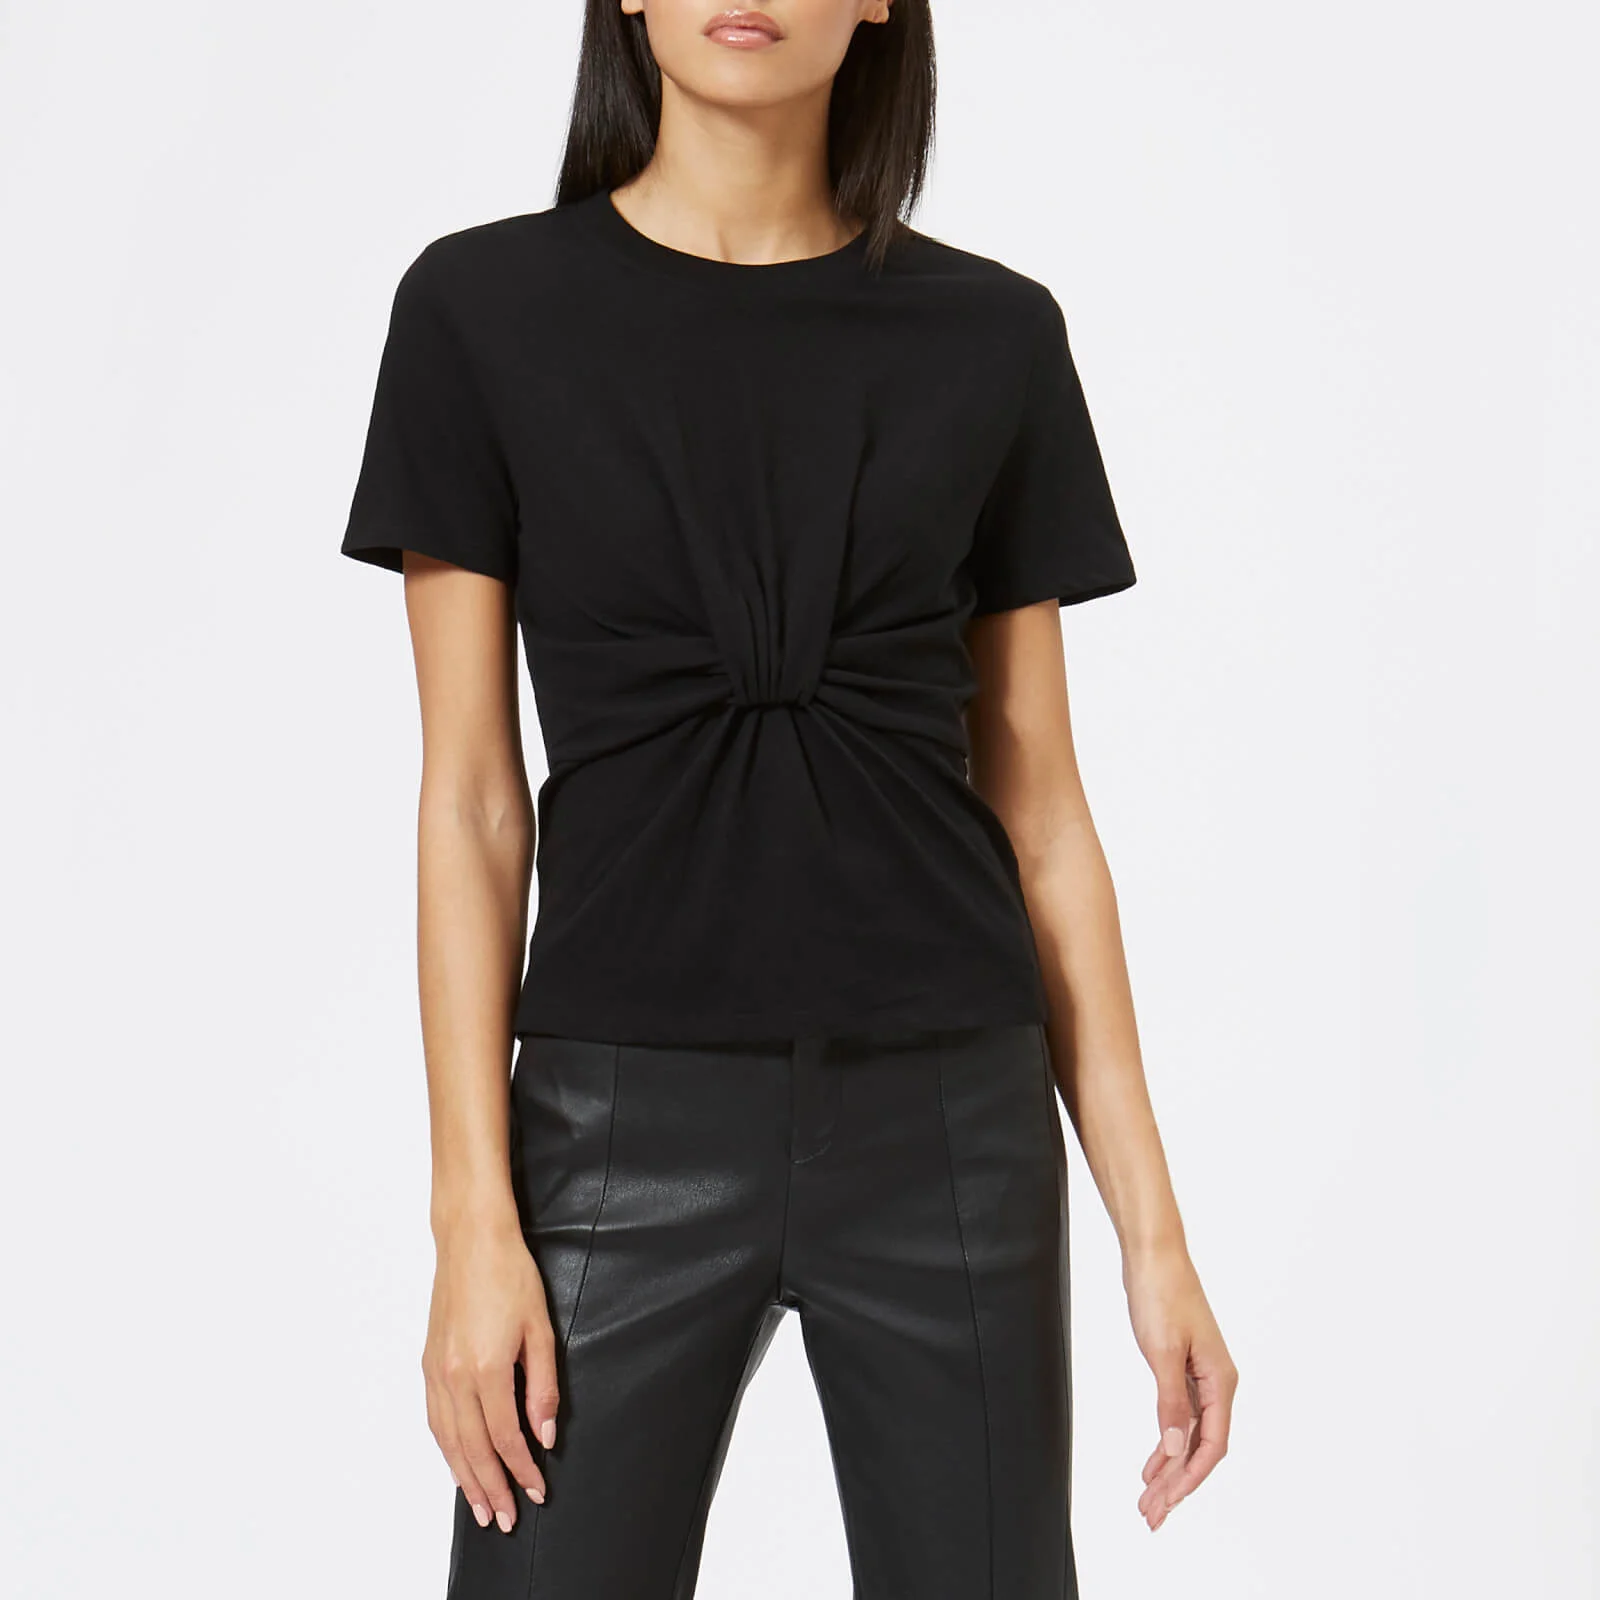 T by Alexander Wang Women's High Twist Jersey T-Shirt with Twist Front Detail - Black Image 1